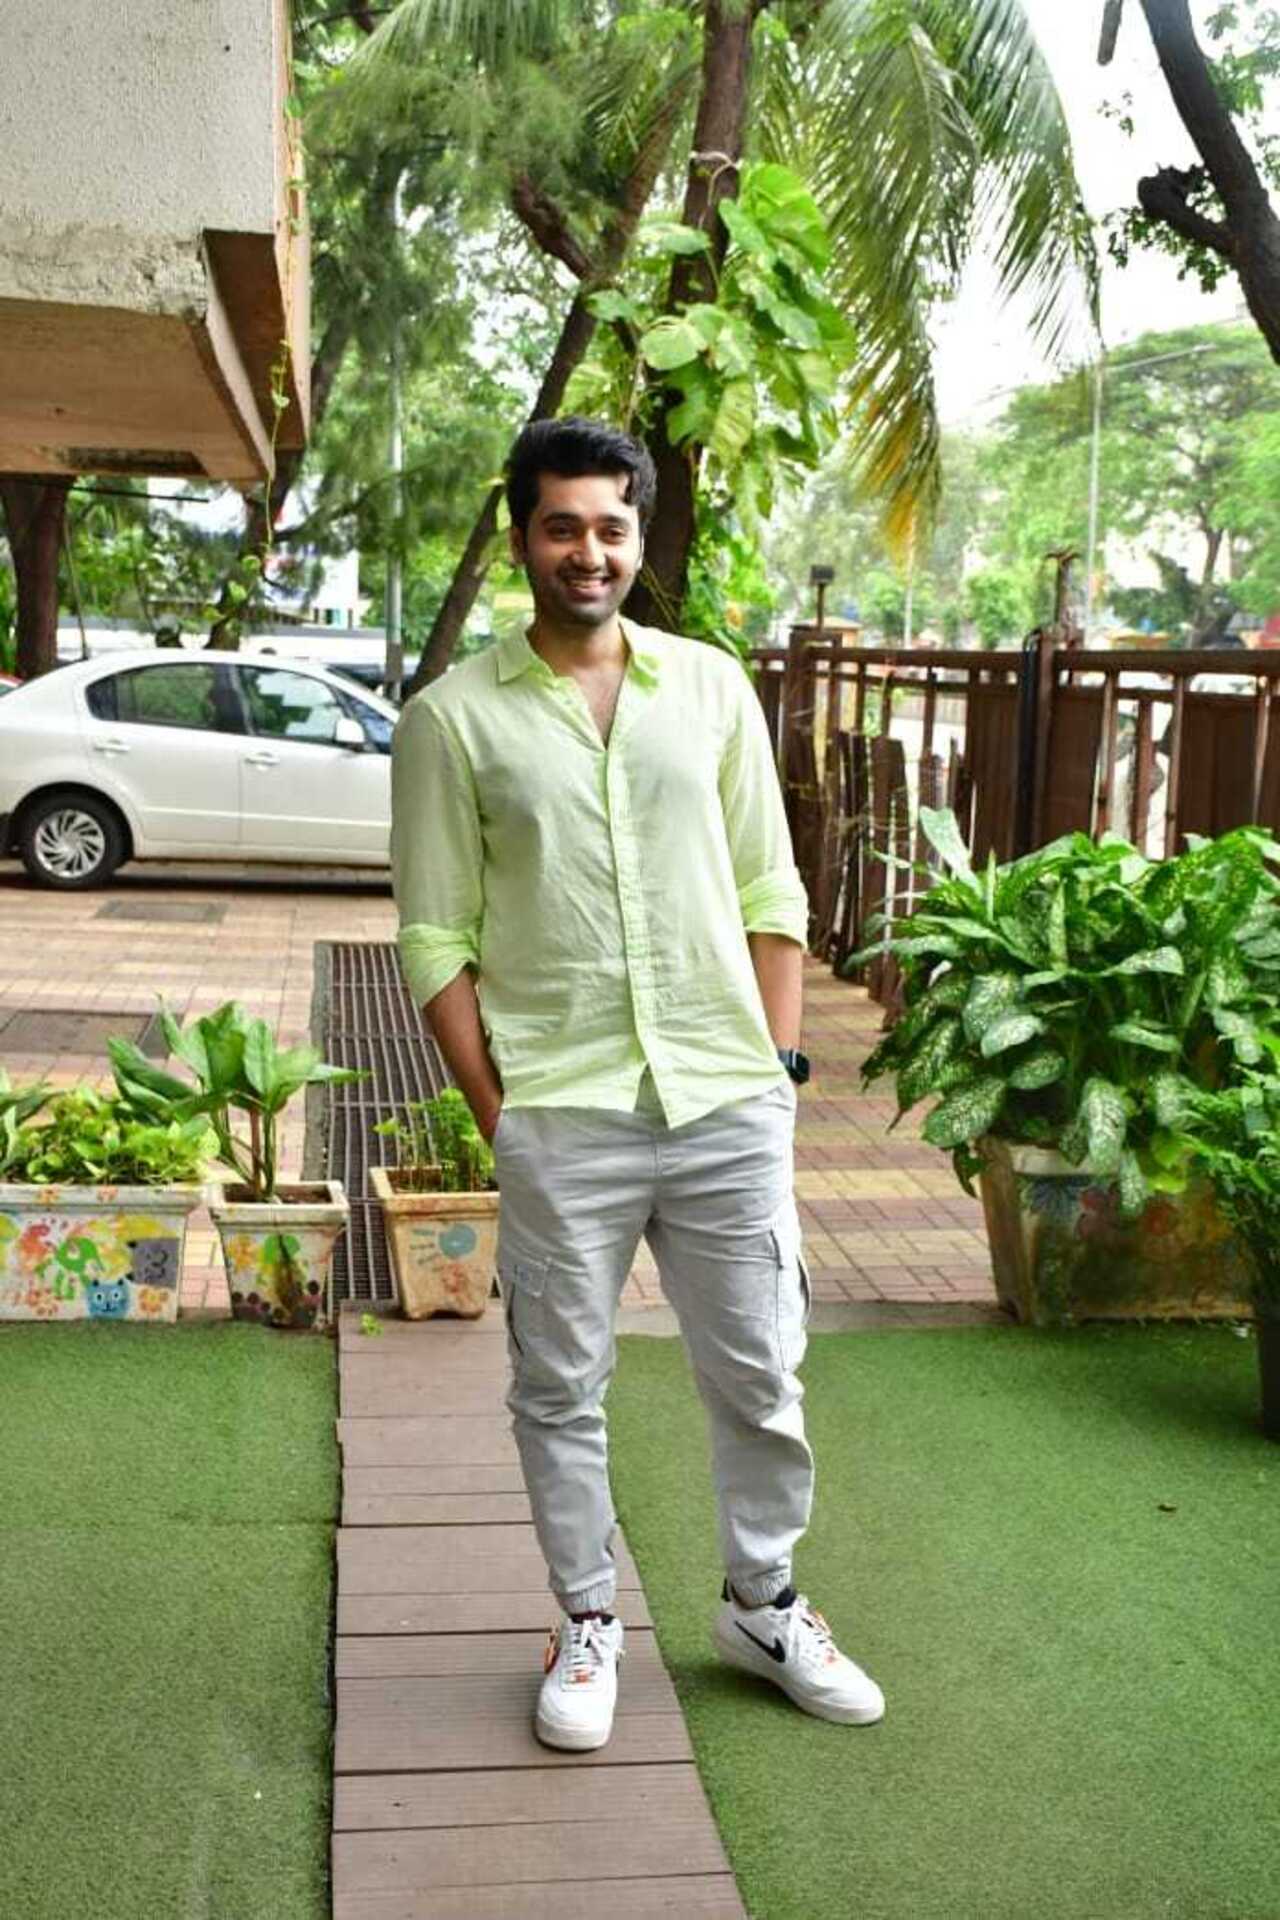 Utkarsh Sharma was spotted wearing a cool green t-shirt paired with white jeans